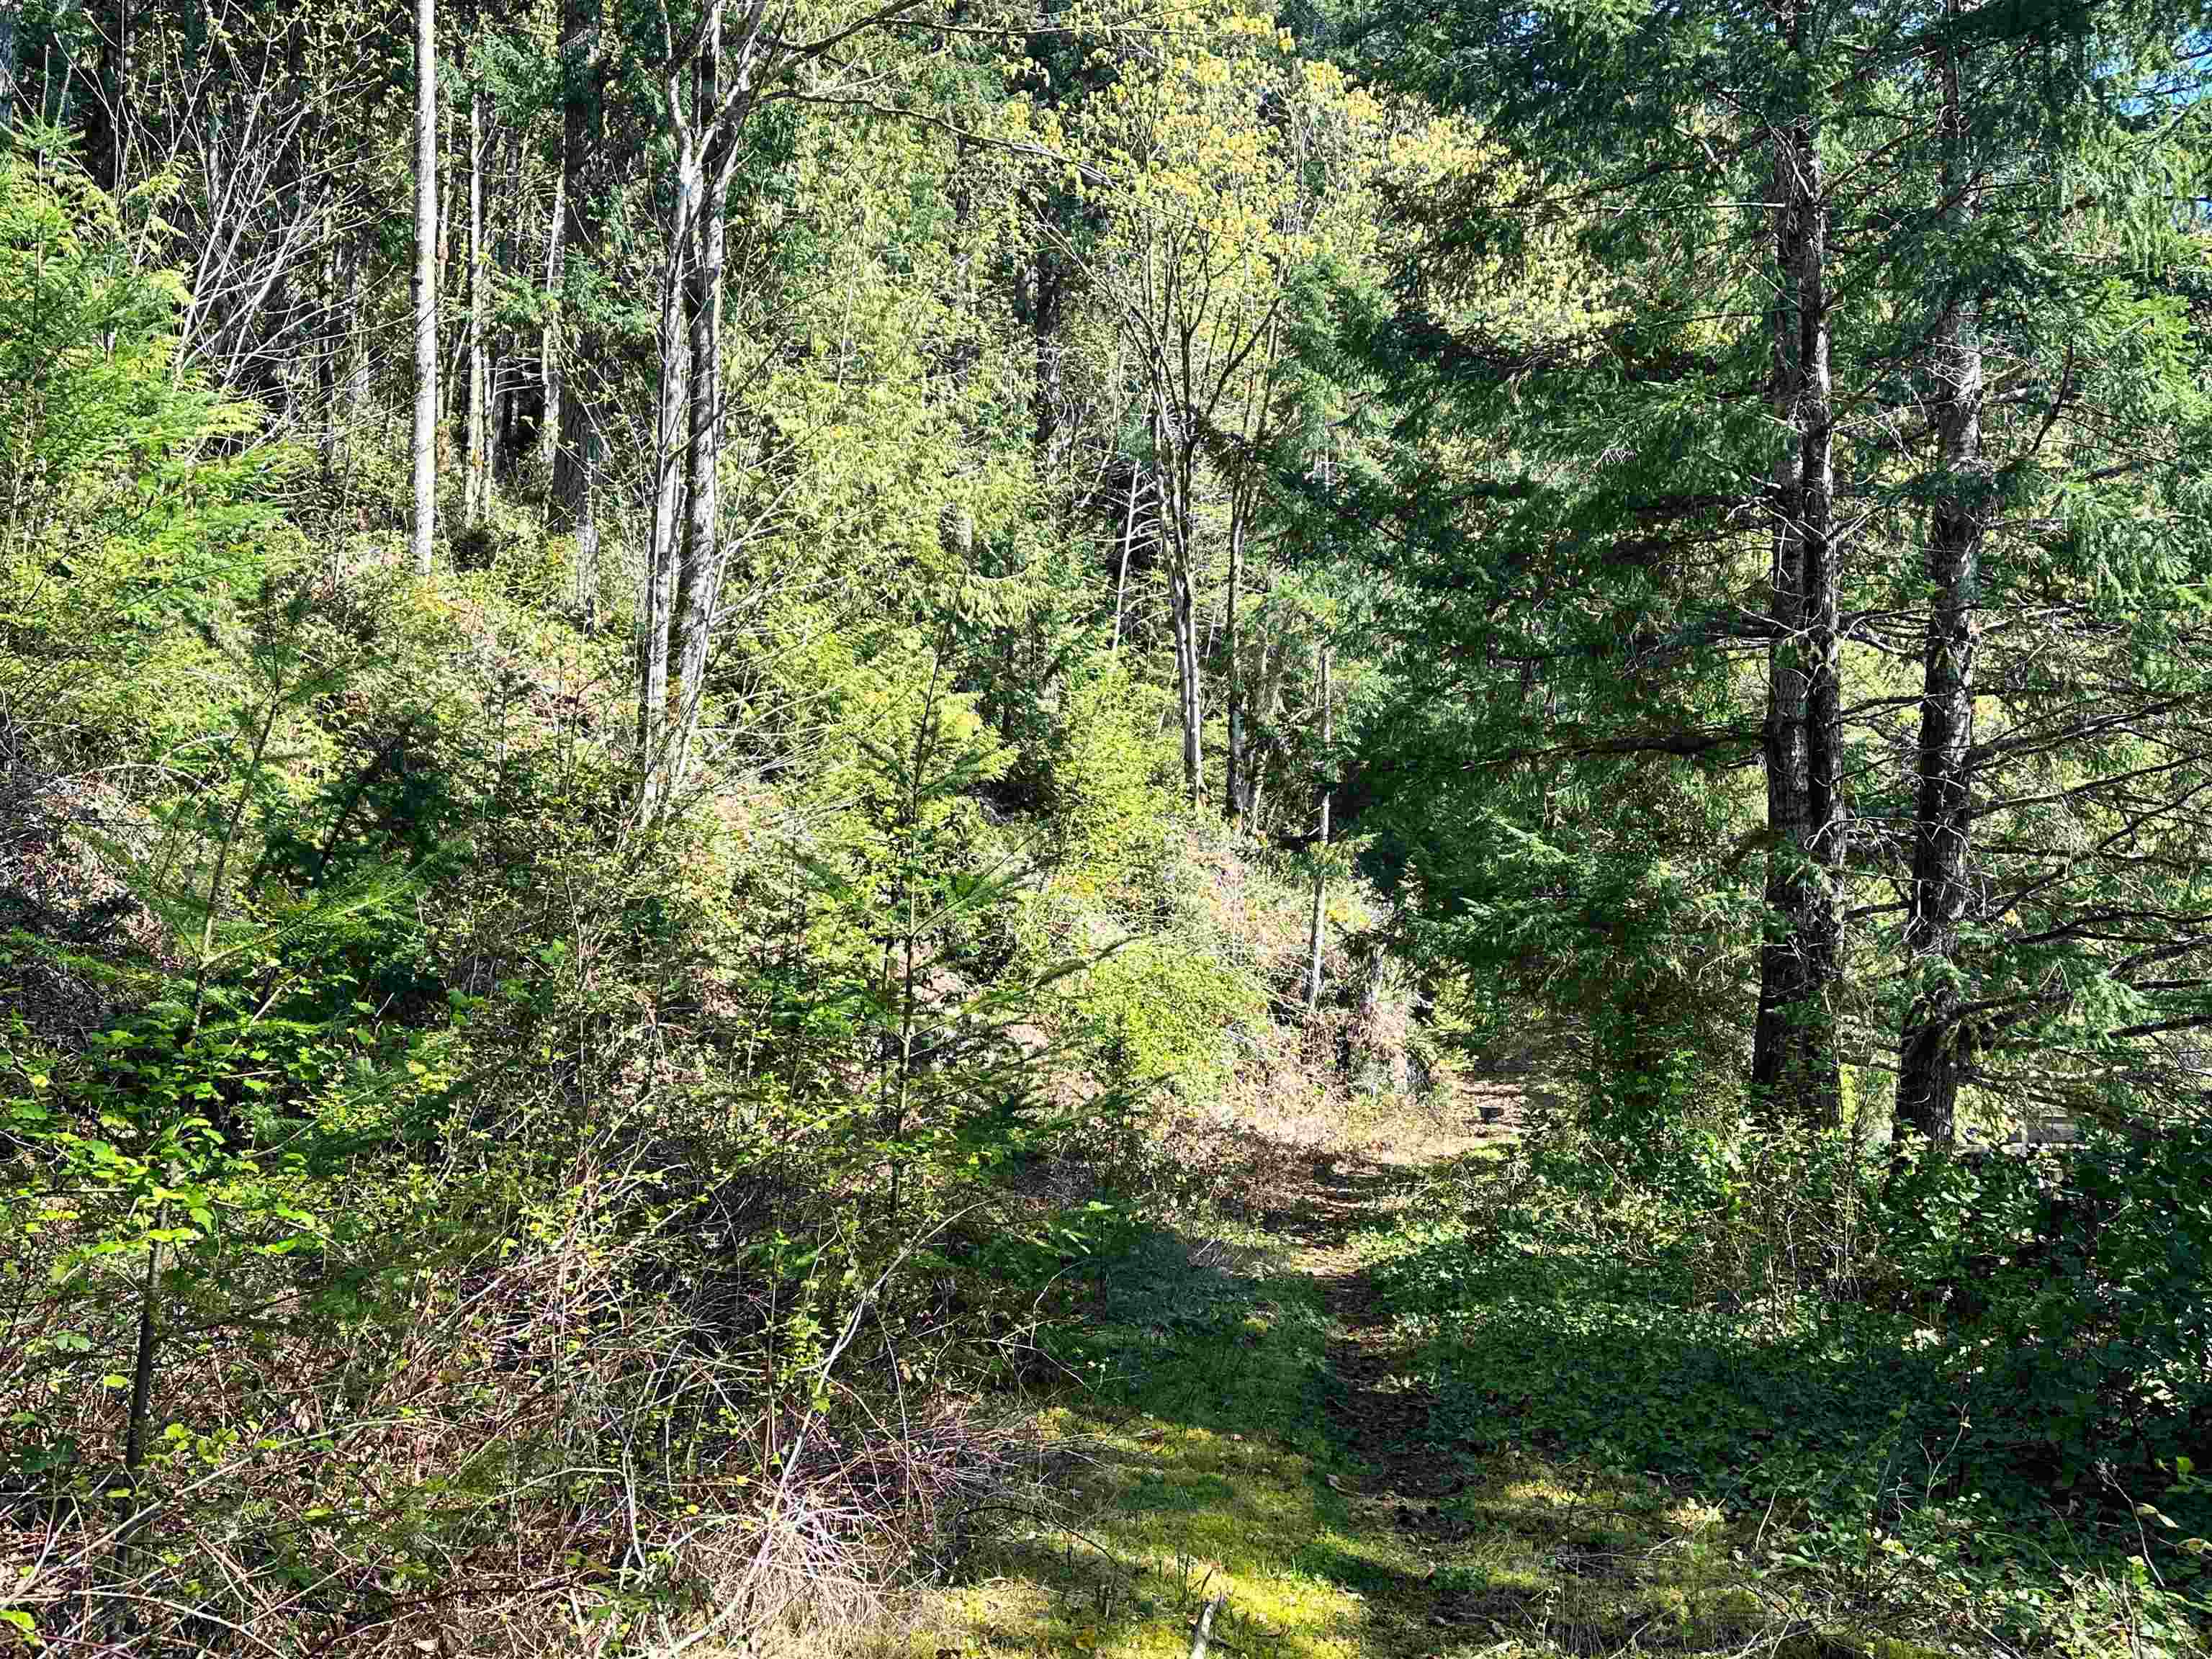 Listing image of DL 4055 E DARK COVE JERVIS ROAD